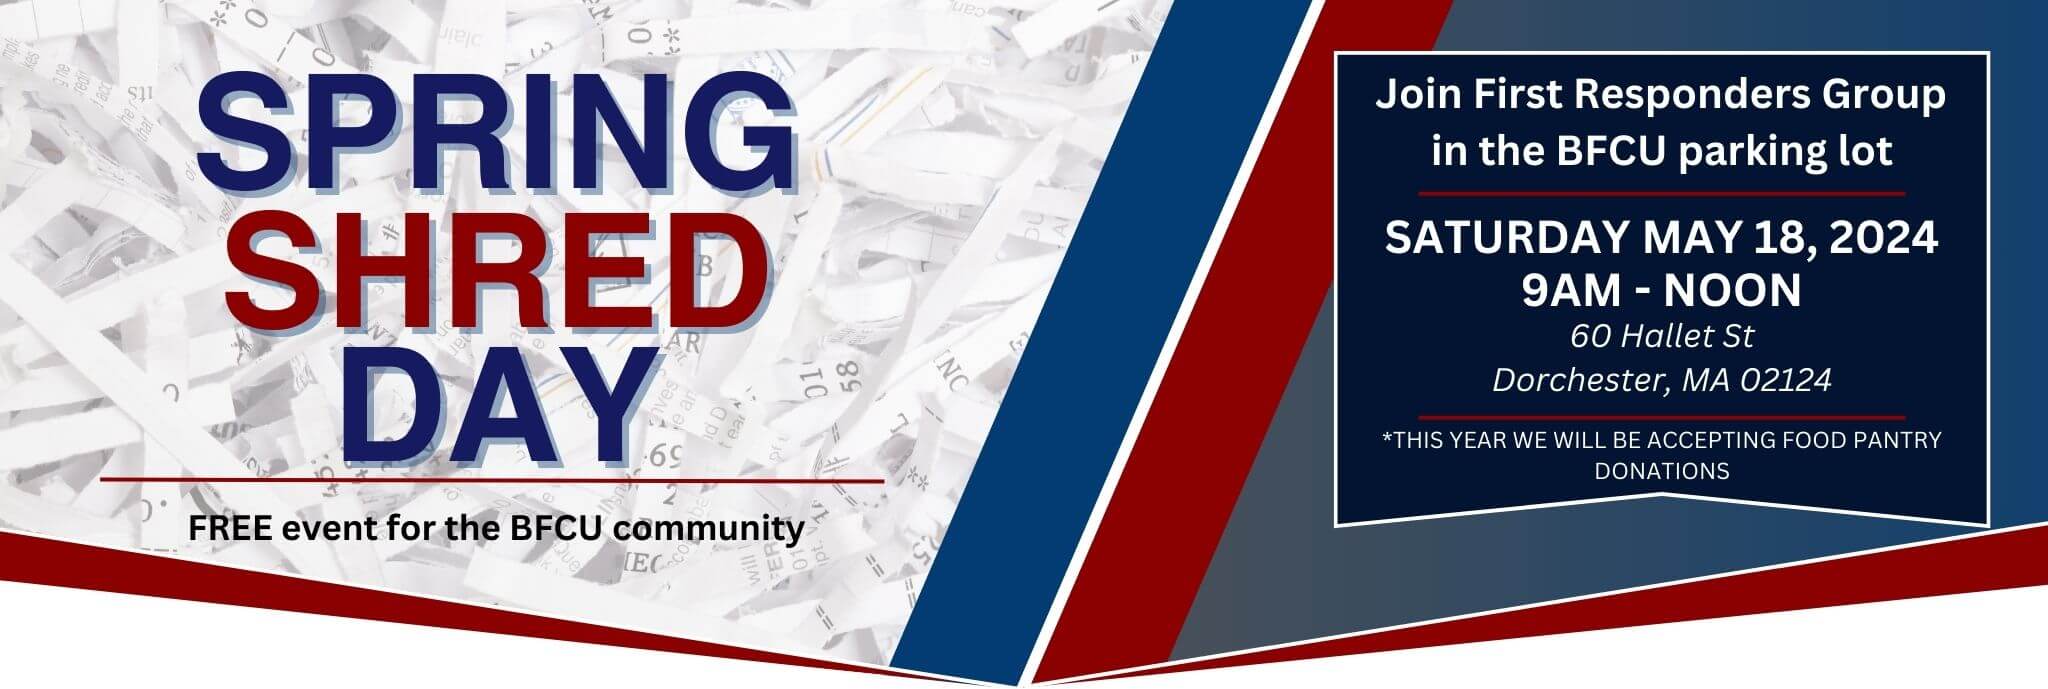 Join first responders Group in the BFCU parking lot on Saturday MAY 18th from 9am to noon for a FREE shred event all BFCU members and their families are welcome we will be accepting food pantry donations